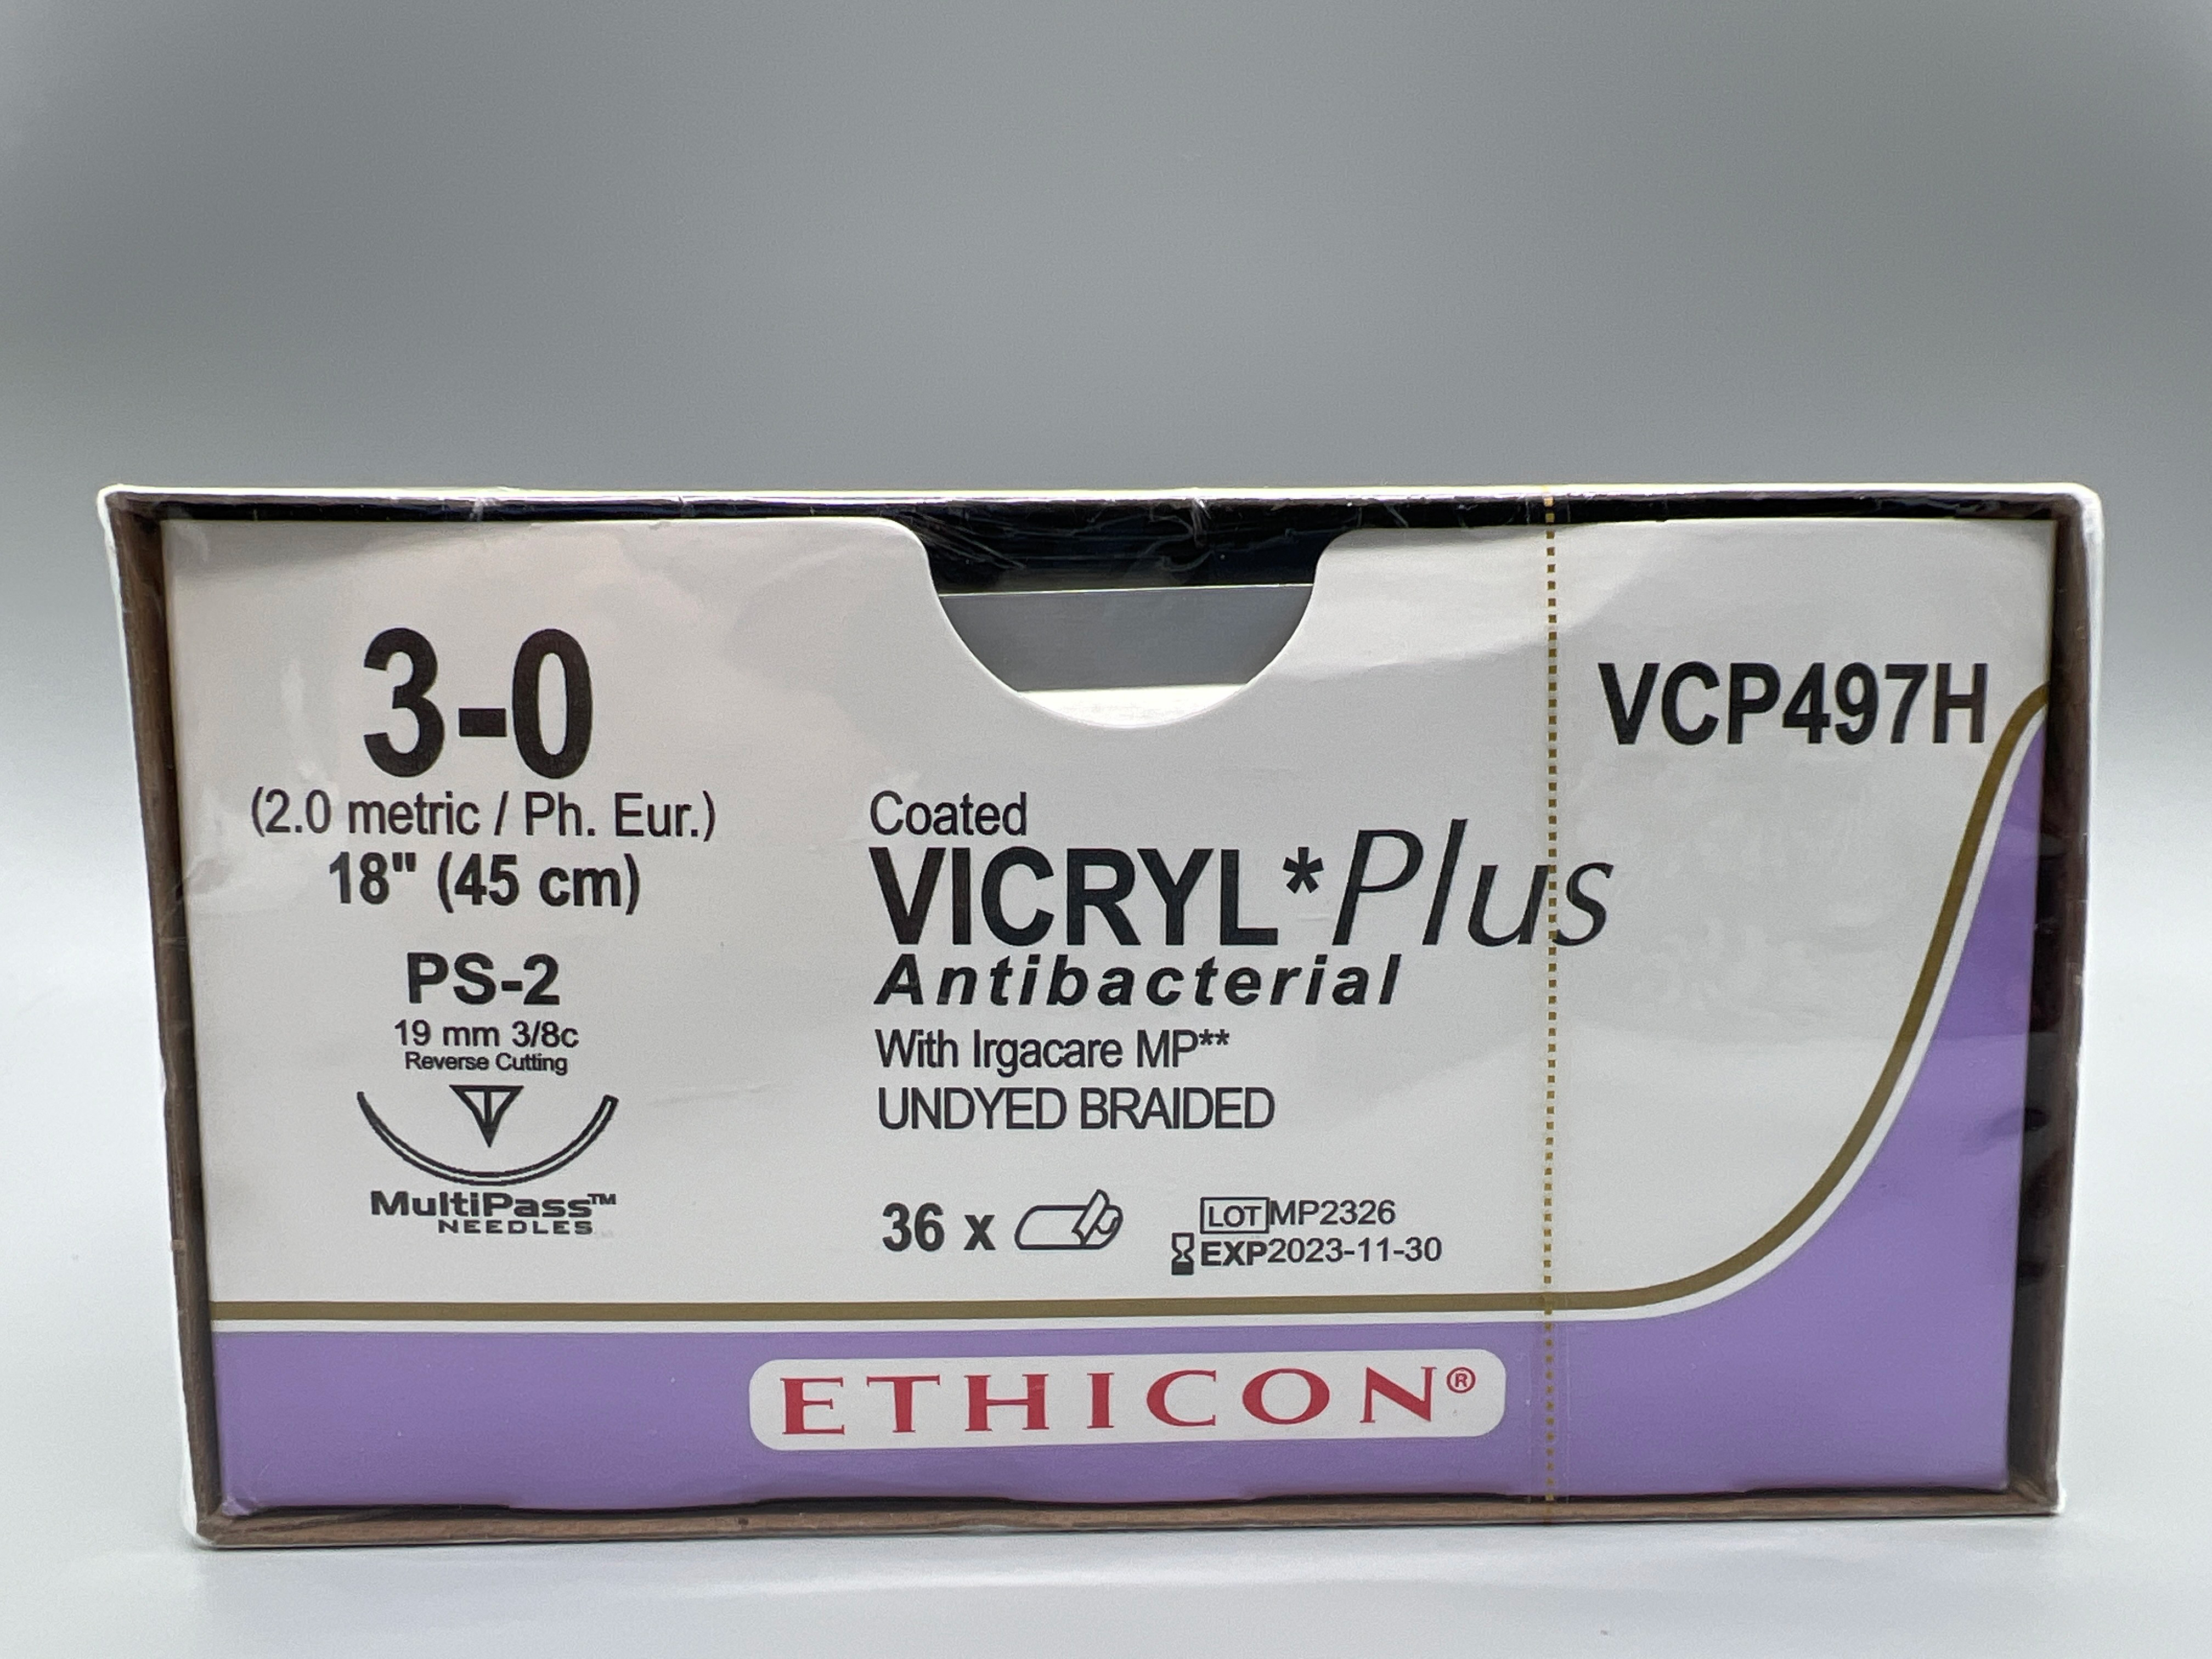 COATED VICRYL PLUS ANTIBACTERIAL UNDYED BRAIDED PS-2 19MM 3/8C REVERSE CUTTING MULTIPASS NEEDLED